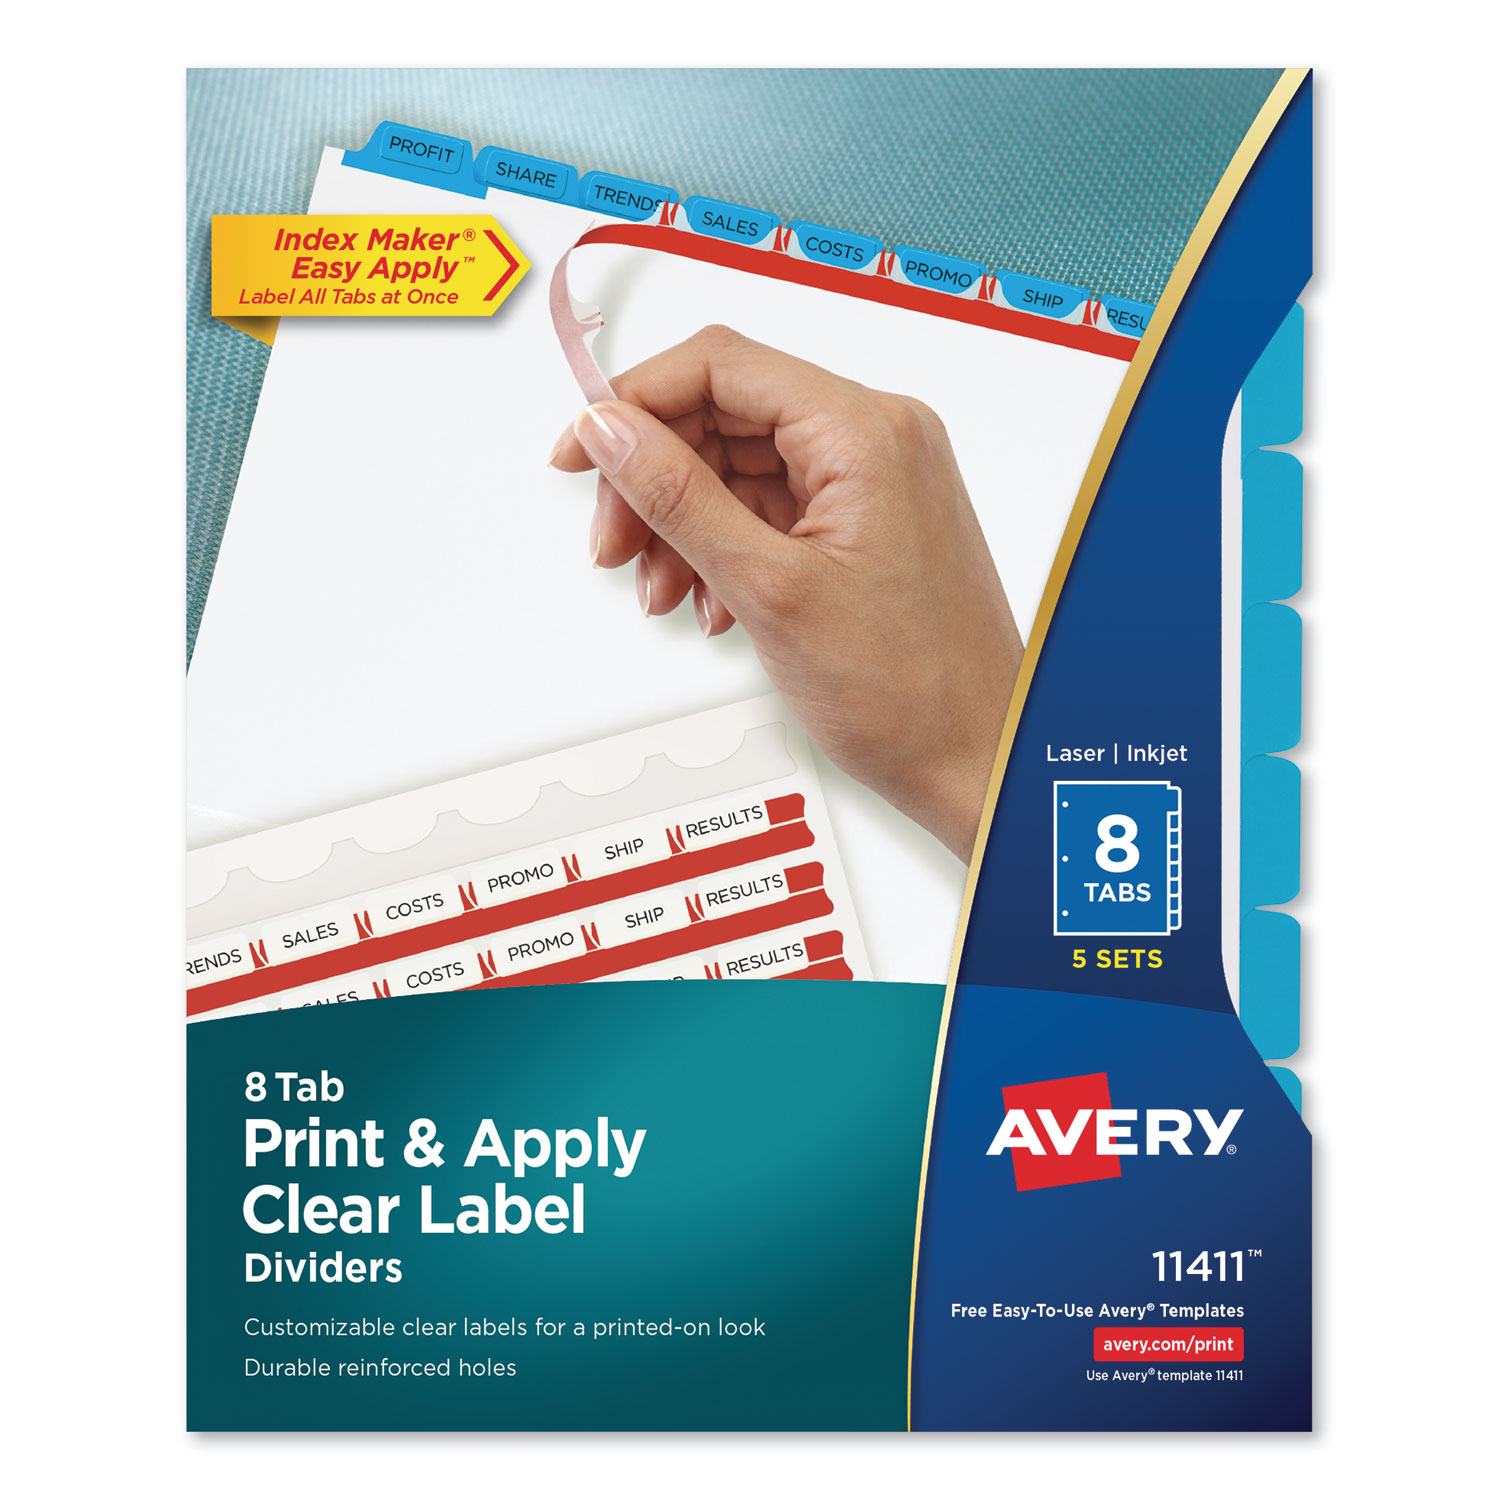  Avery 11411 Print and Apply Index Maker Clear Label Dividers, 8 Color Tabs, Letter, 5 Sets (AVE11411) 